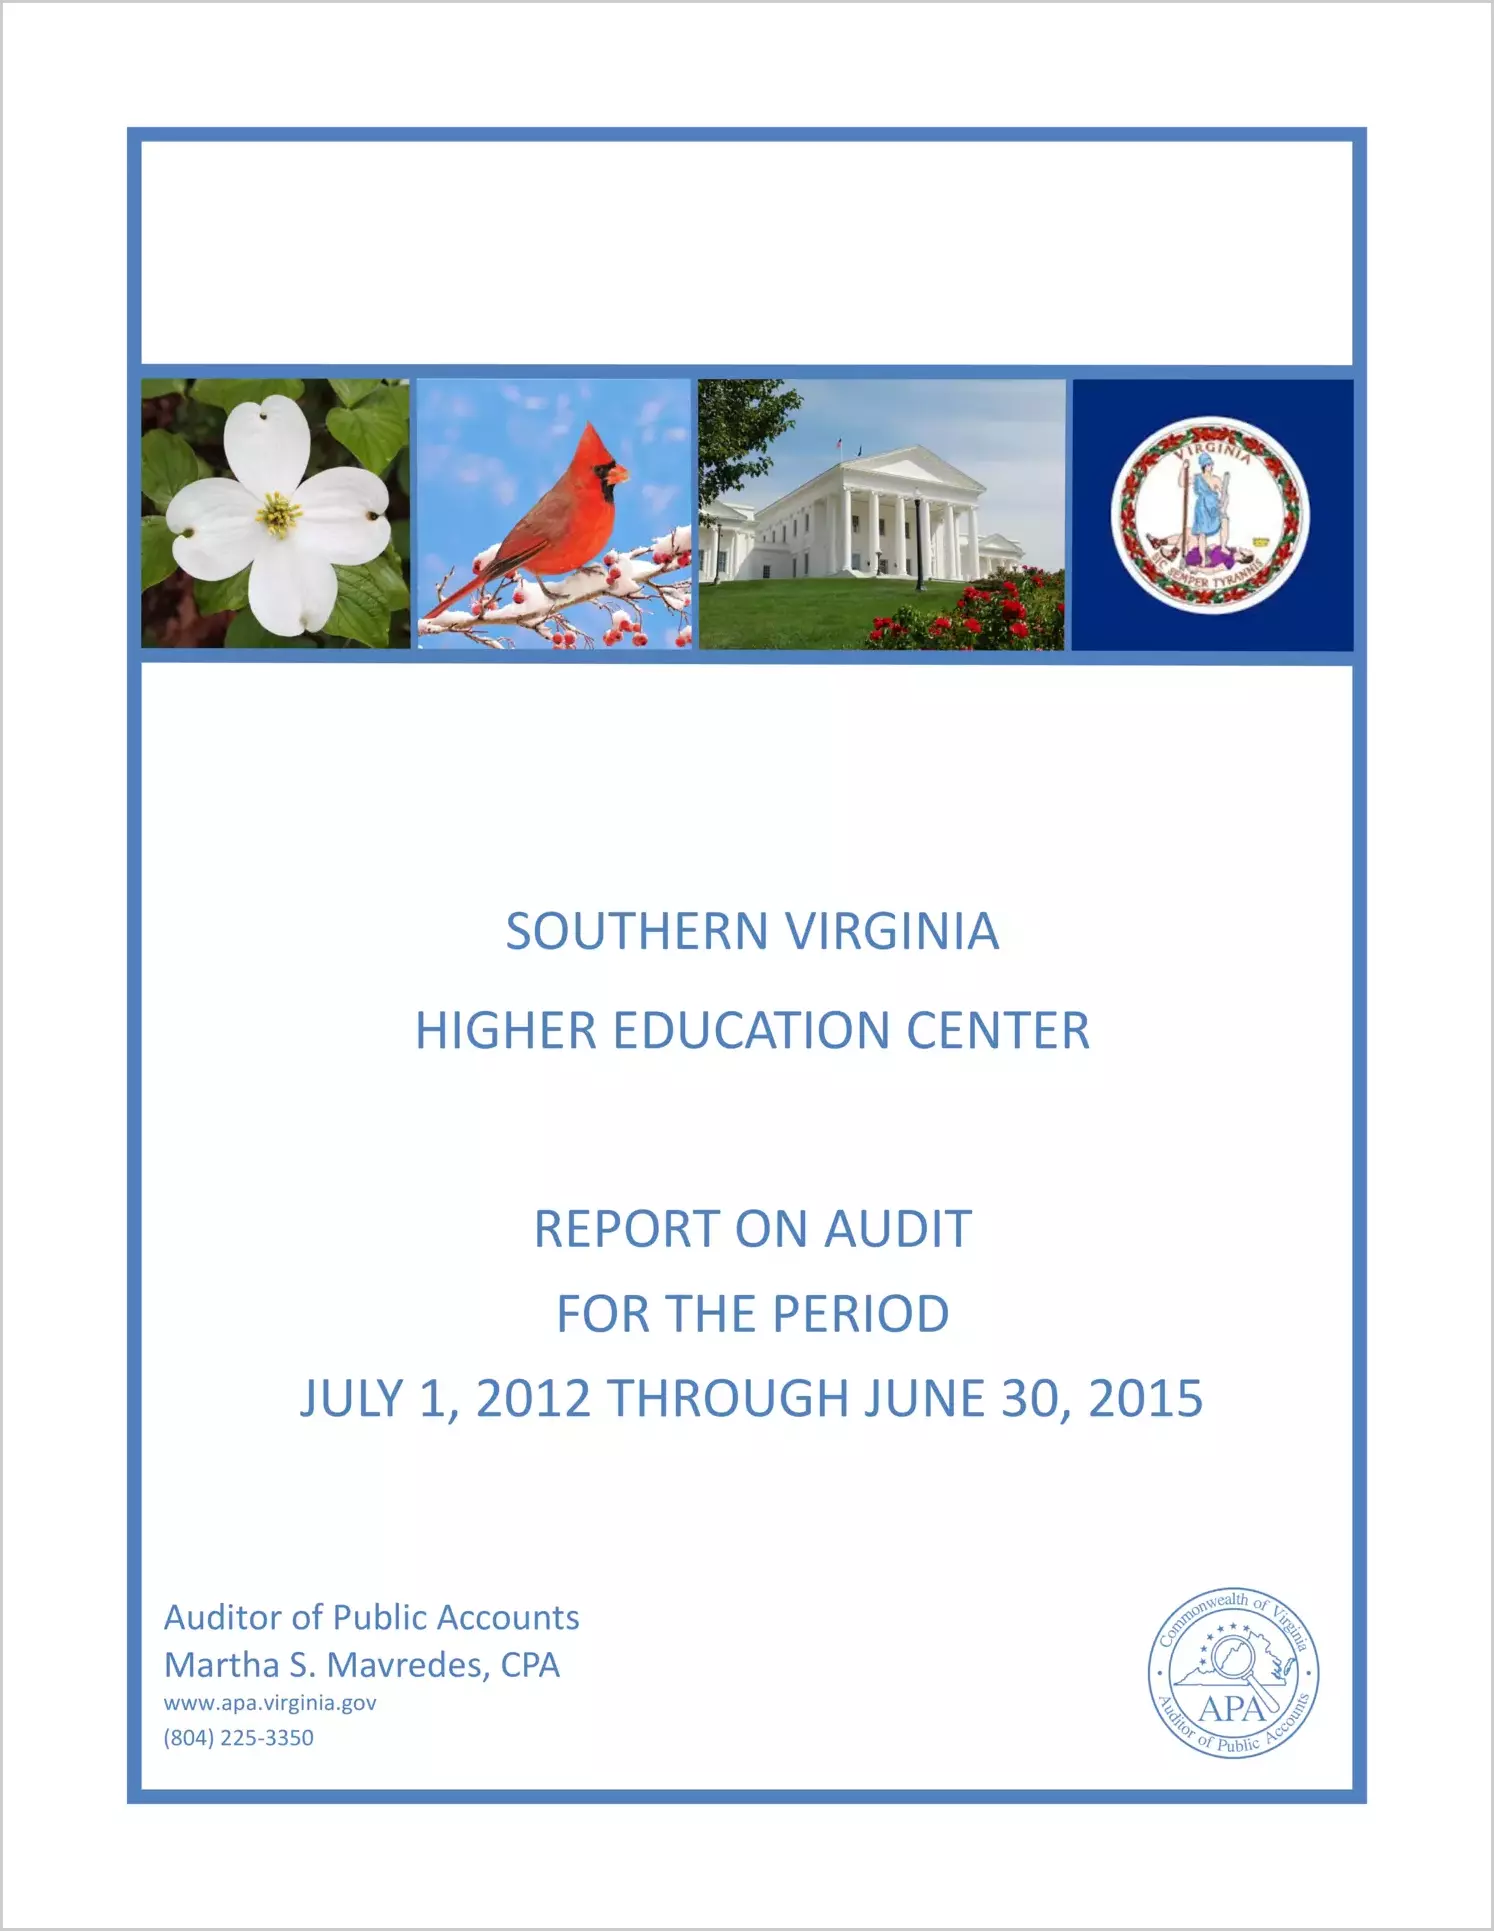 Southern Virginia Higher Education Center for the period July 1, 2012, through June 30, 2015